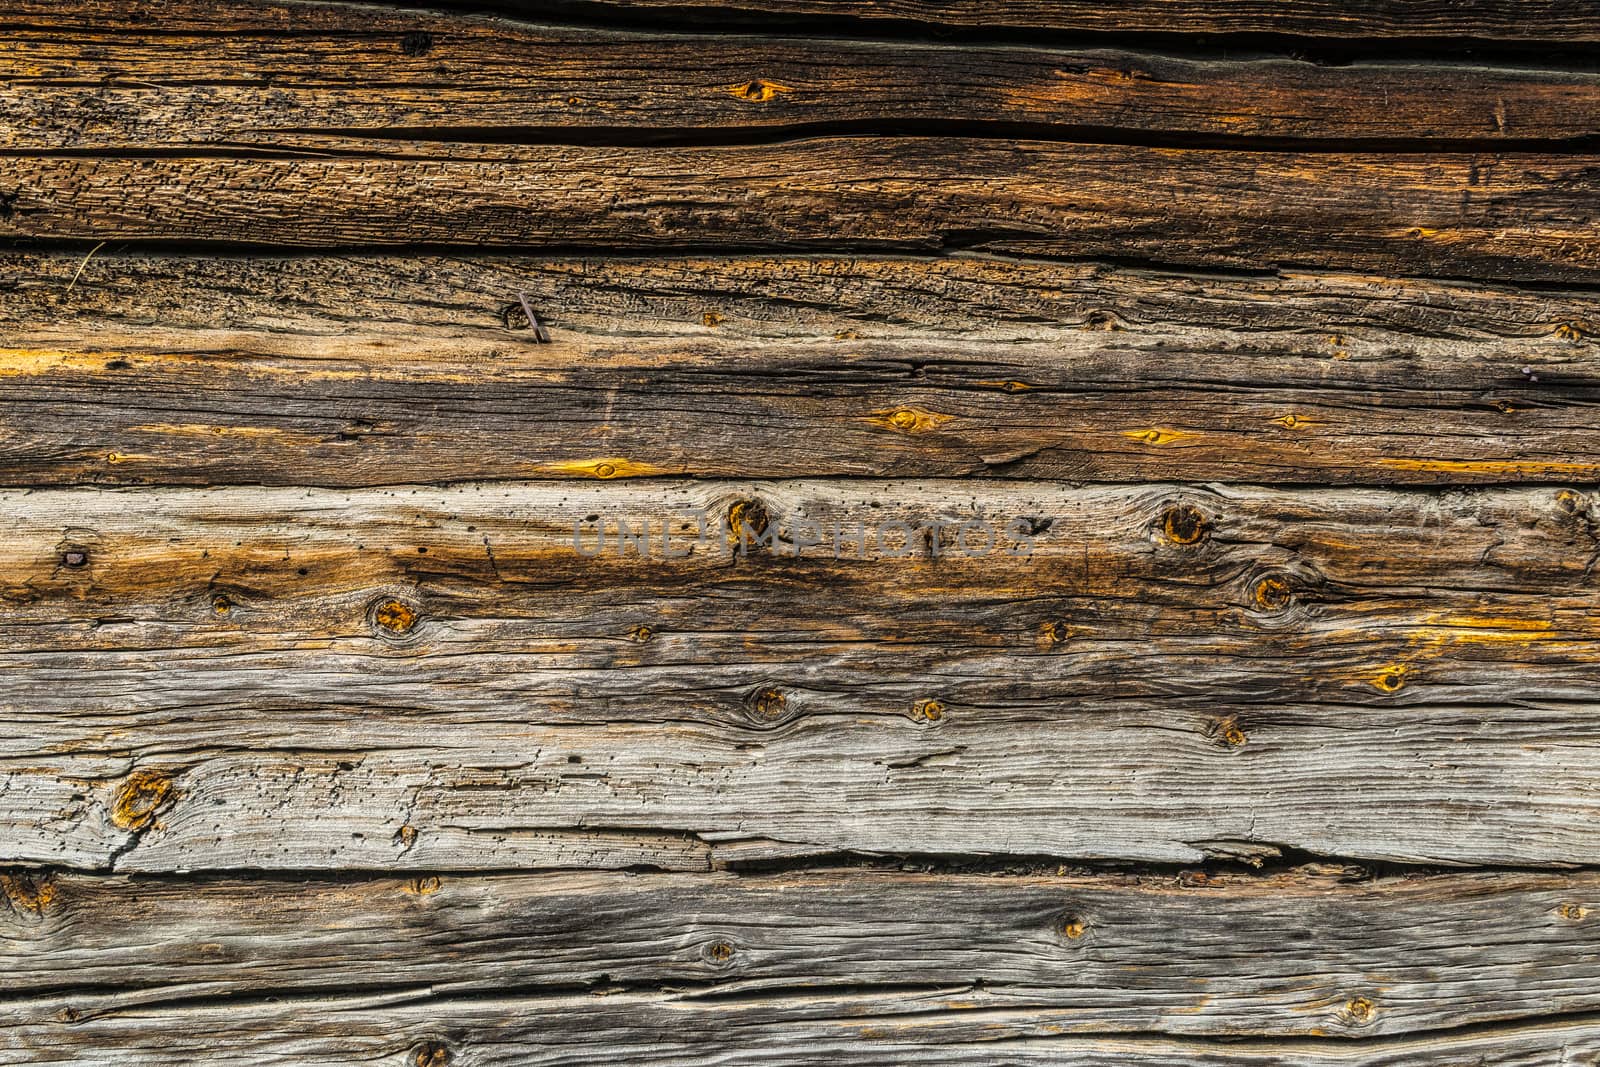 Old, weathered and worn wood texture plank with cracks and bursts